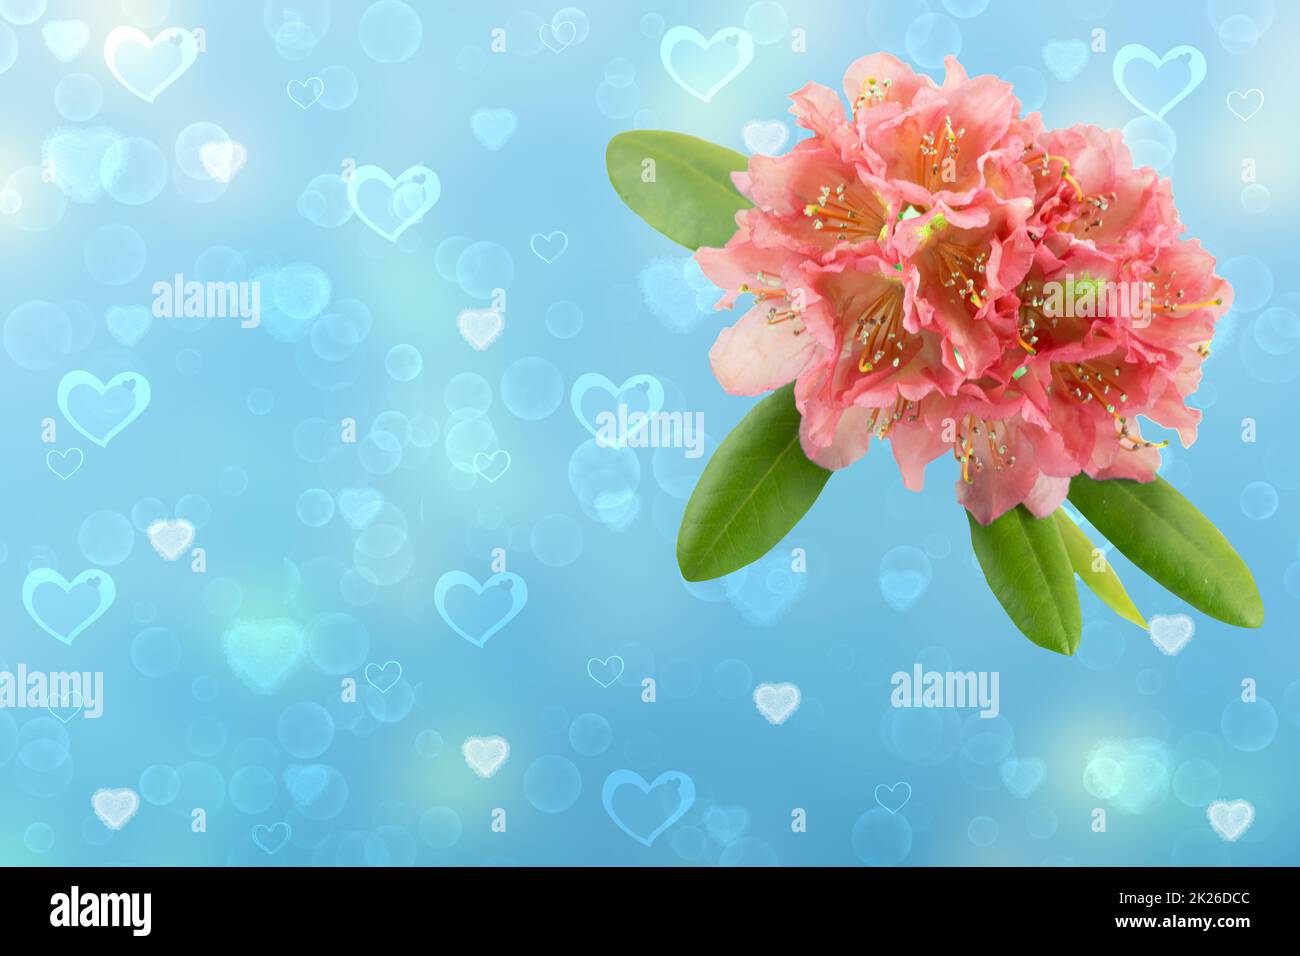 Happy Valentine or Mothers Day card template. 3D illustration of a light pink flower rhododendron, azalee over abstract blue background with hearts. Space for text design. Stock Photo